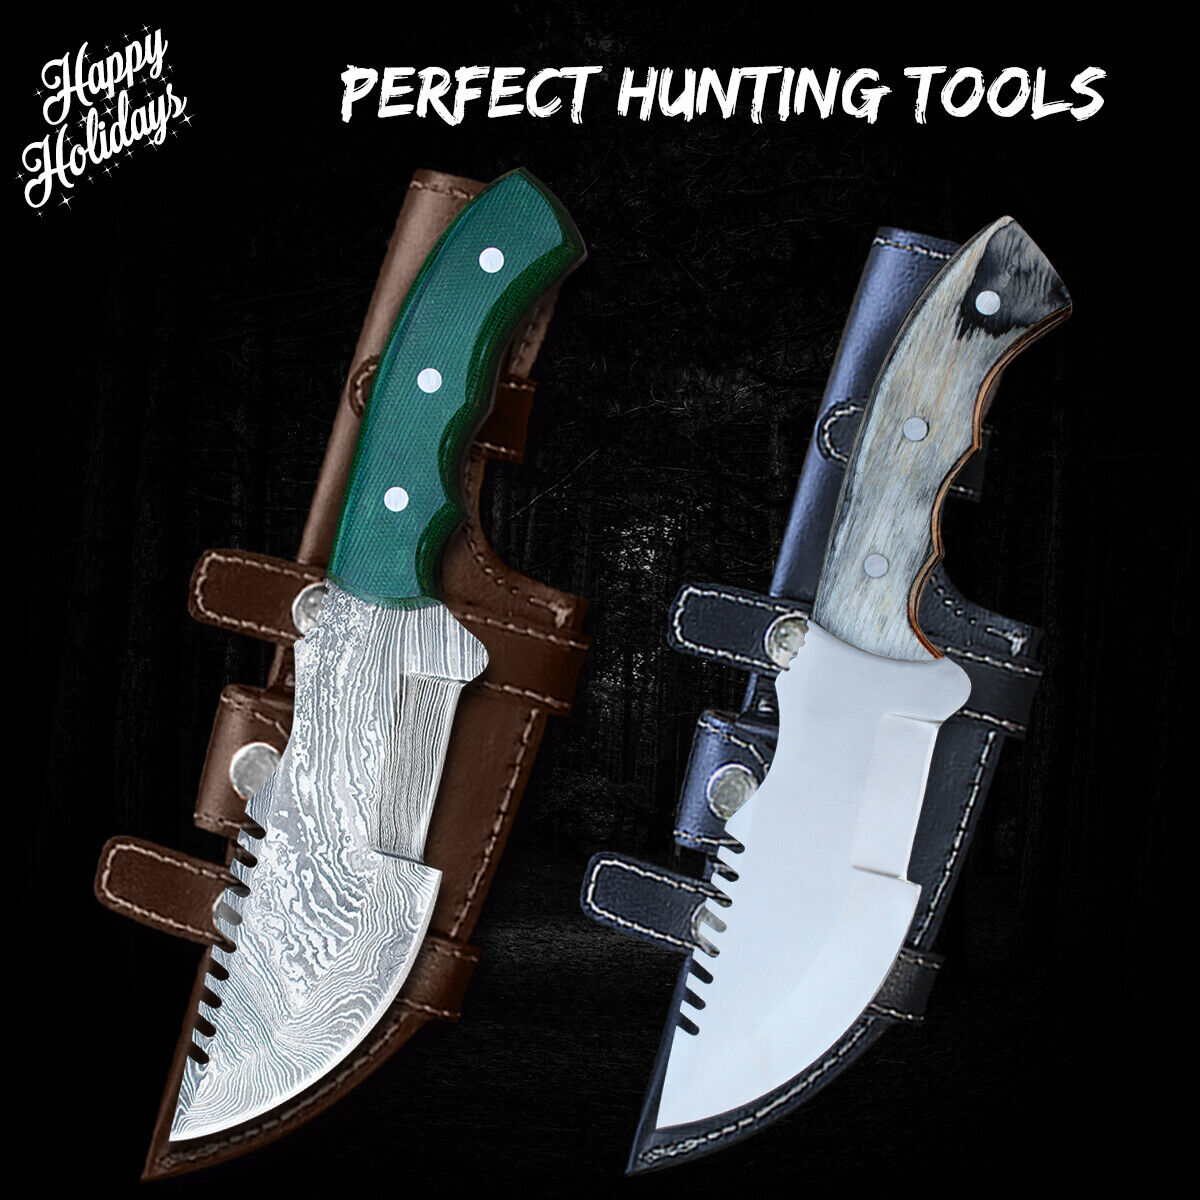 TRACKER® Hunting Knife Gift For Hunters 2 pcs Set, Survival & Outdoor knife Gift